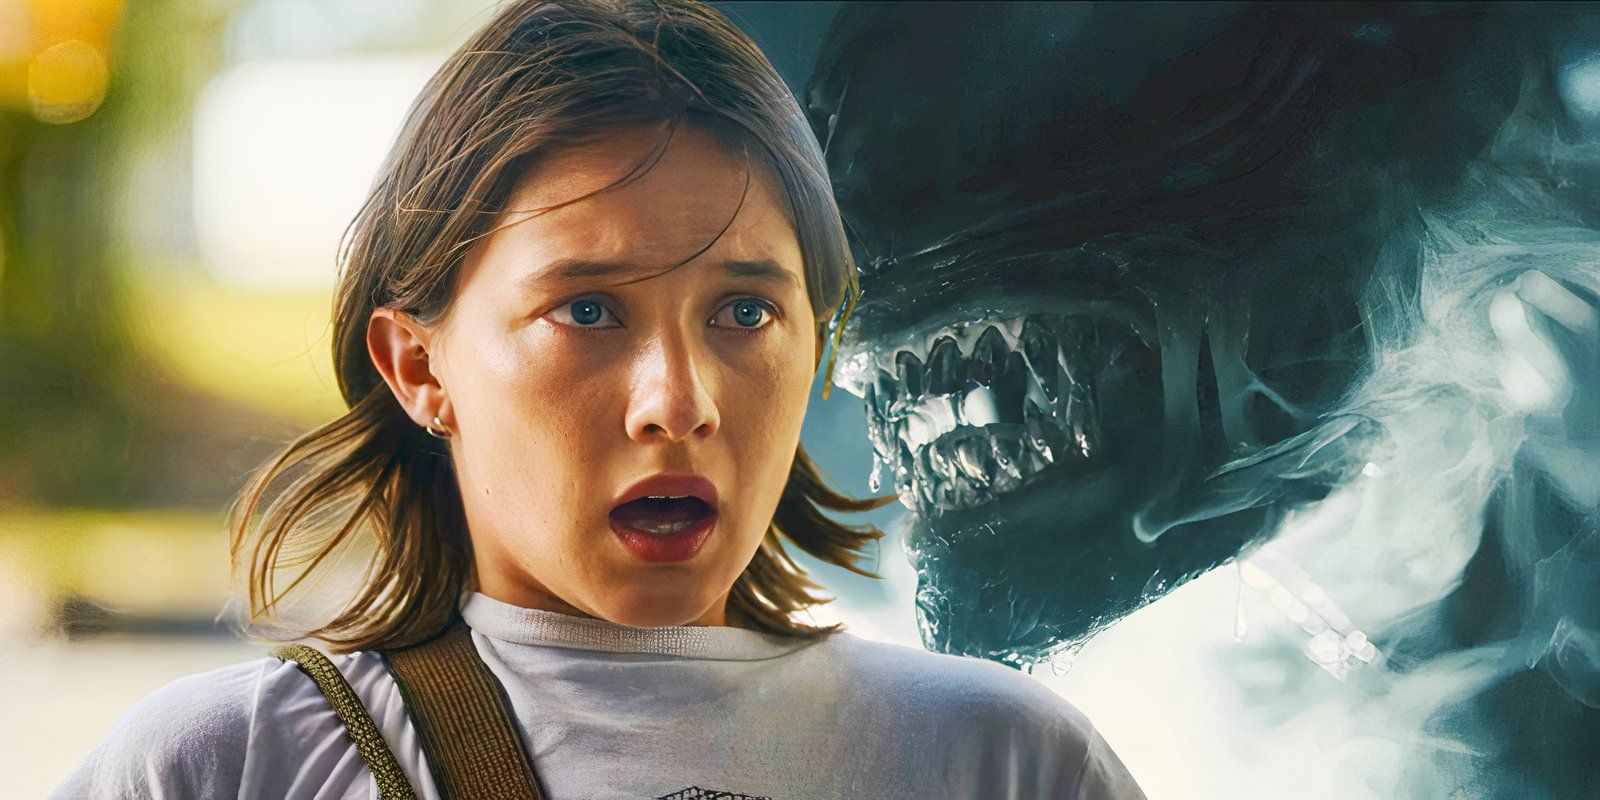 Cailee Spaeny as Jesse in Civil War juxtaposed with a Xenomorph from Alien Romulus